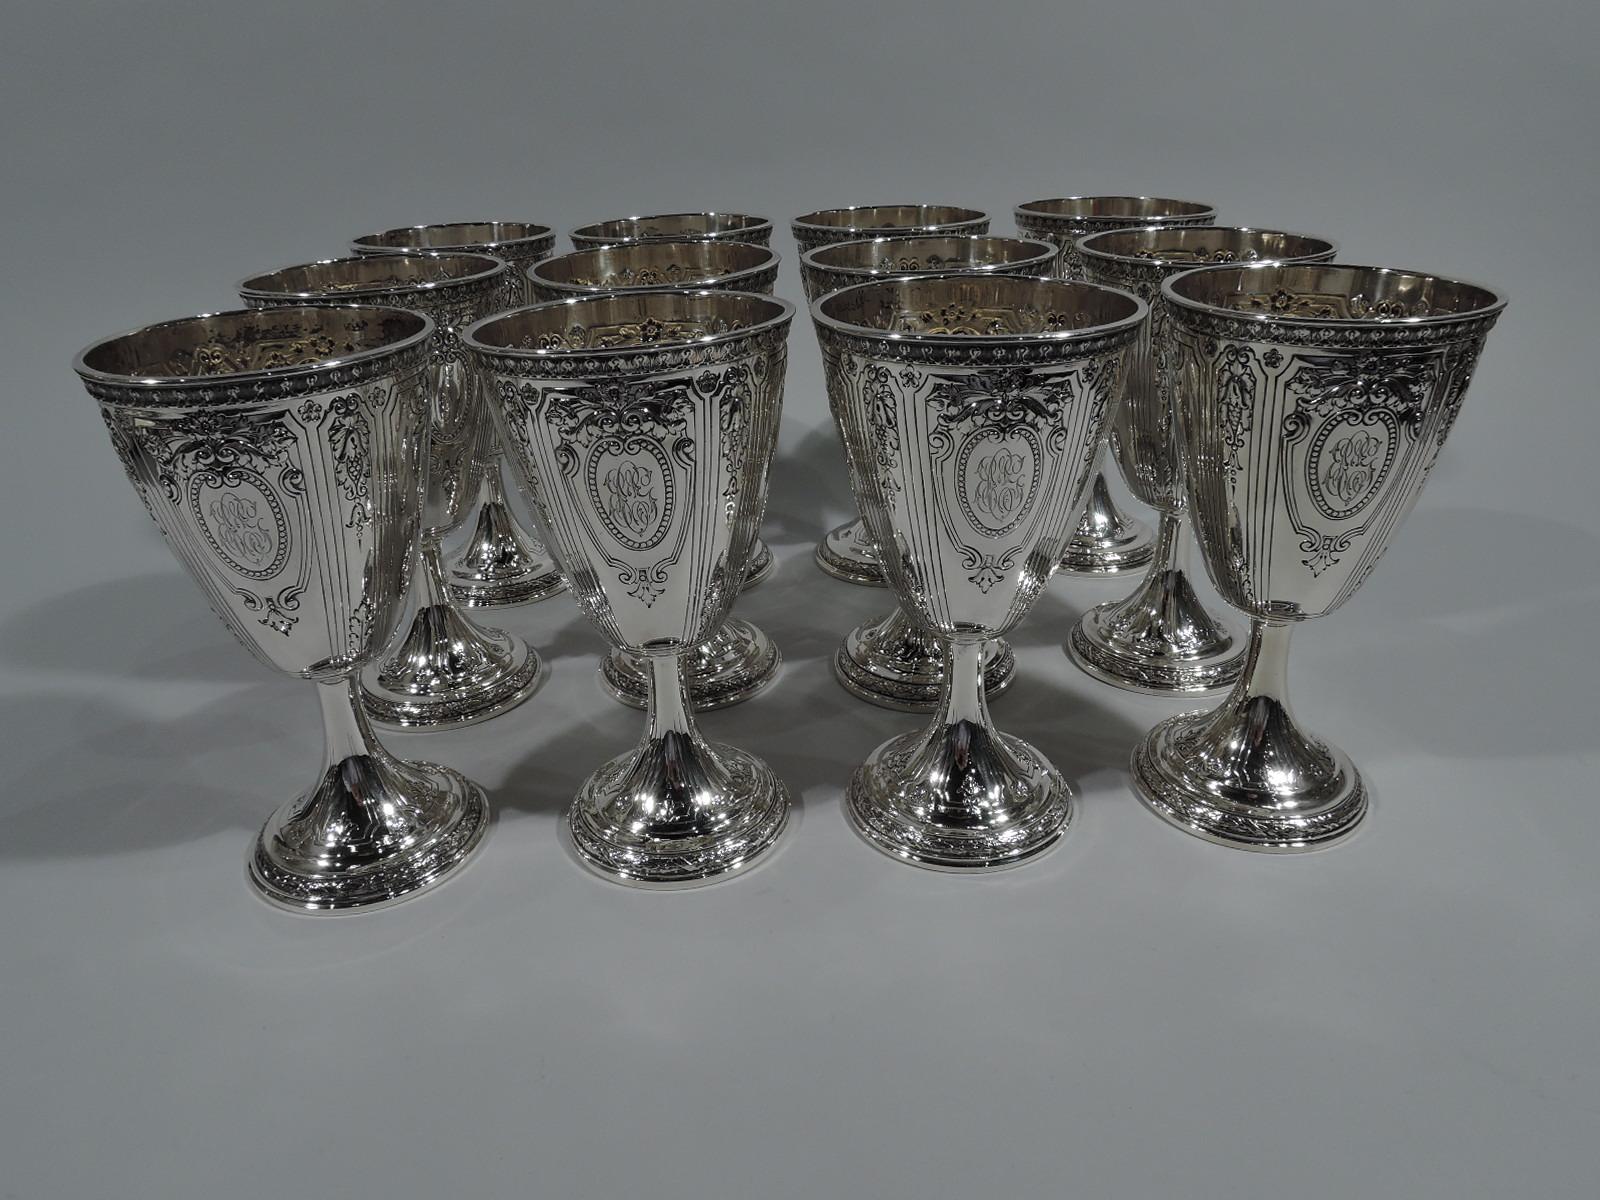 Set of 12 sterling silver goblets in Maintenon pattern. Made by Gorham in Providence in 1929. Each: conical bowl on cylindrical stem terminating in raised foot. Curvilinear frames inset with foliage and flowers, as well as 2 2 beaded scroll